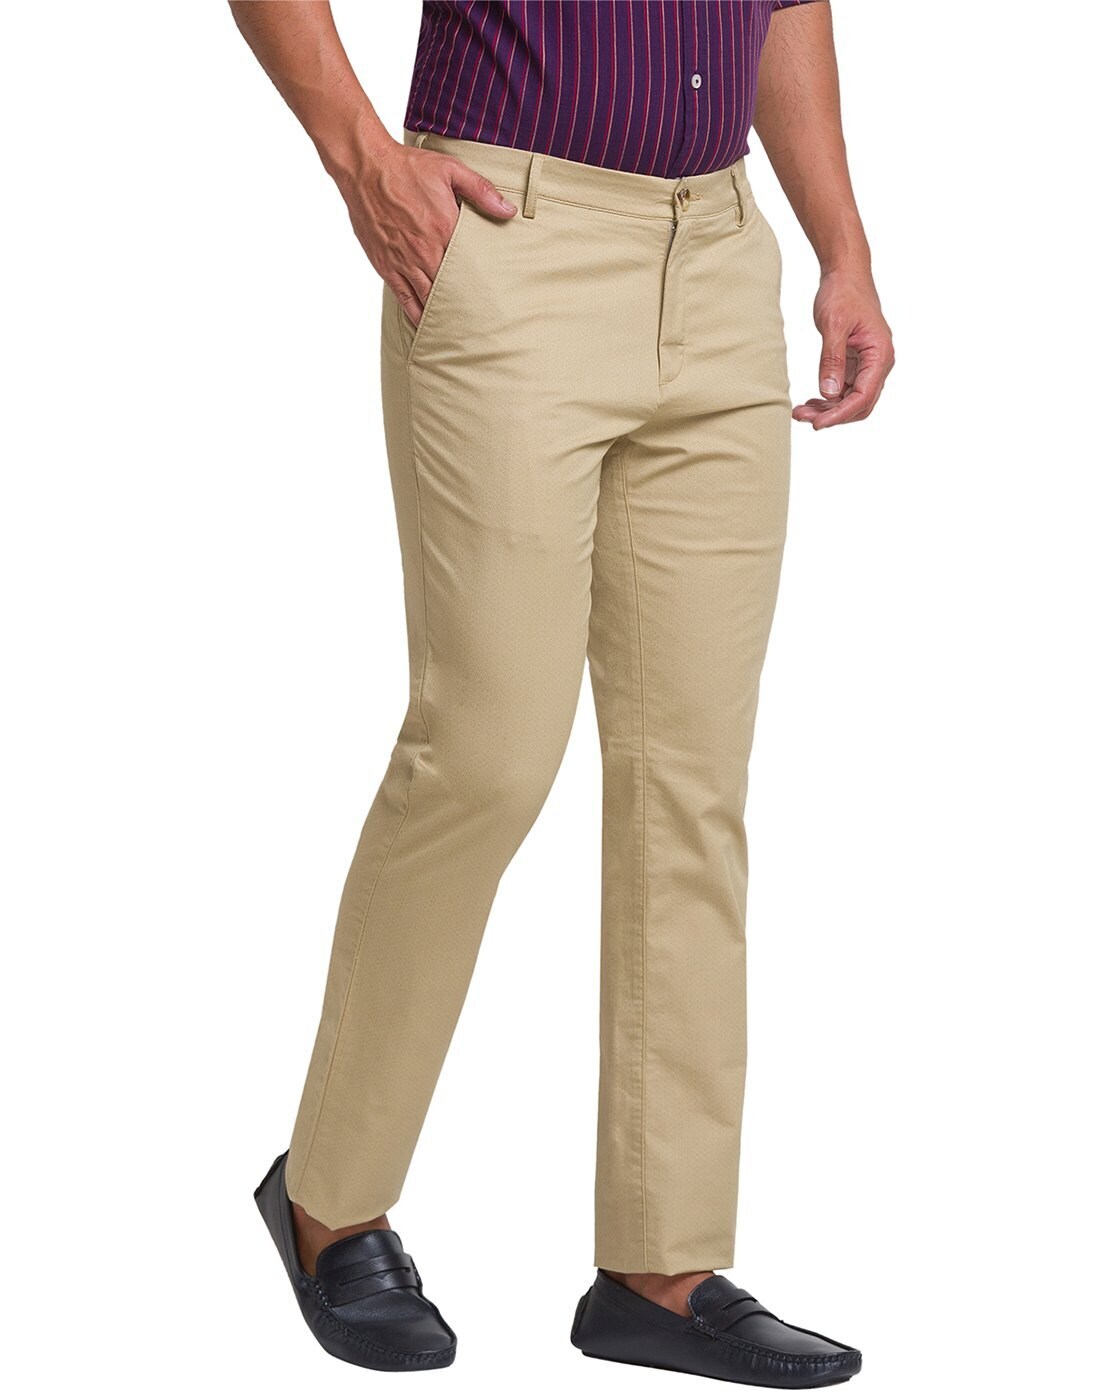 Buy White Classic Regular Fit Solid Formal Trousers online  Looksgudin